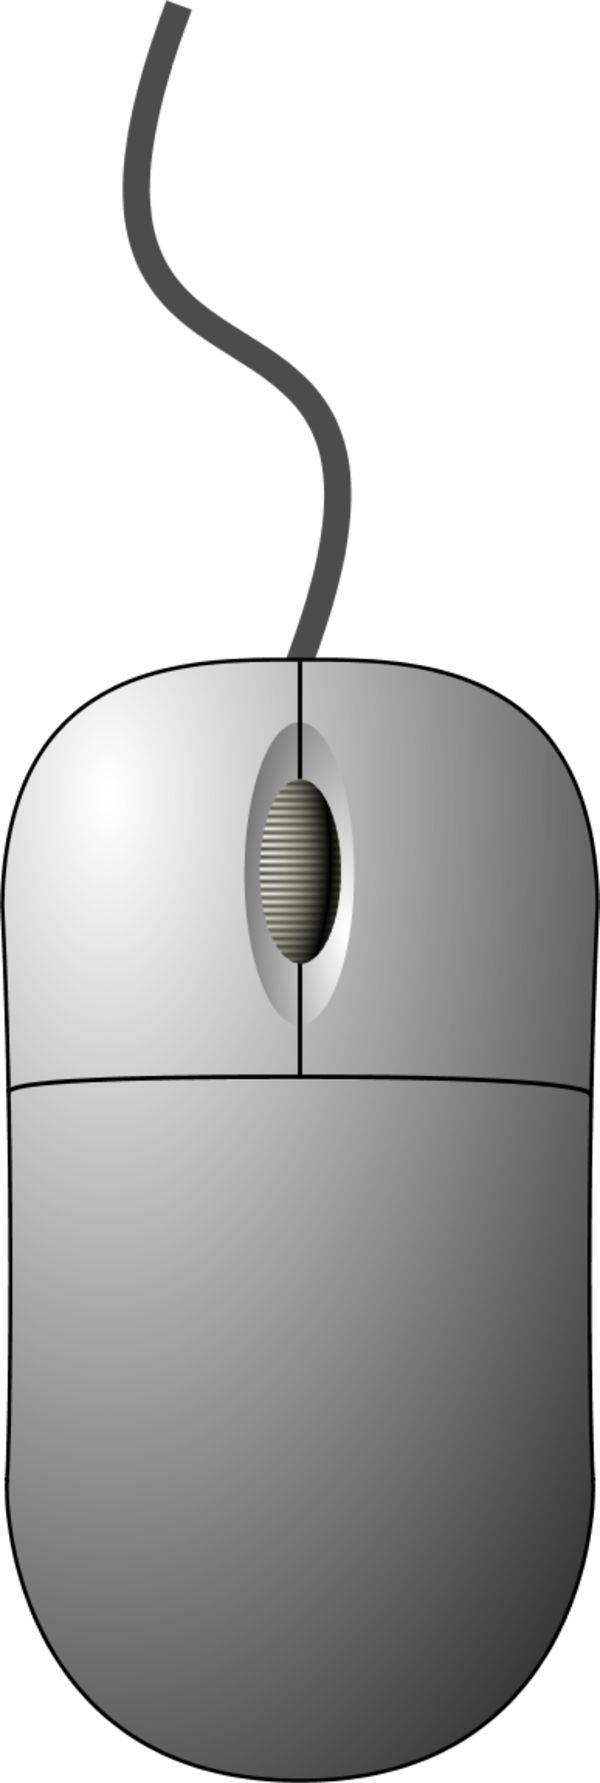 Computer Mouse Top Down View   Vector Clip Art